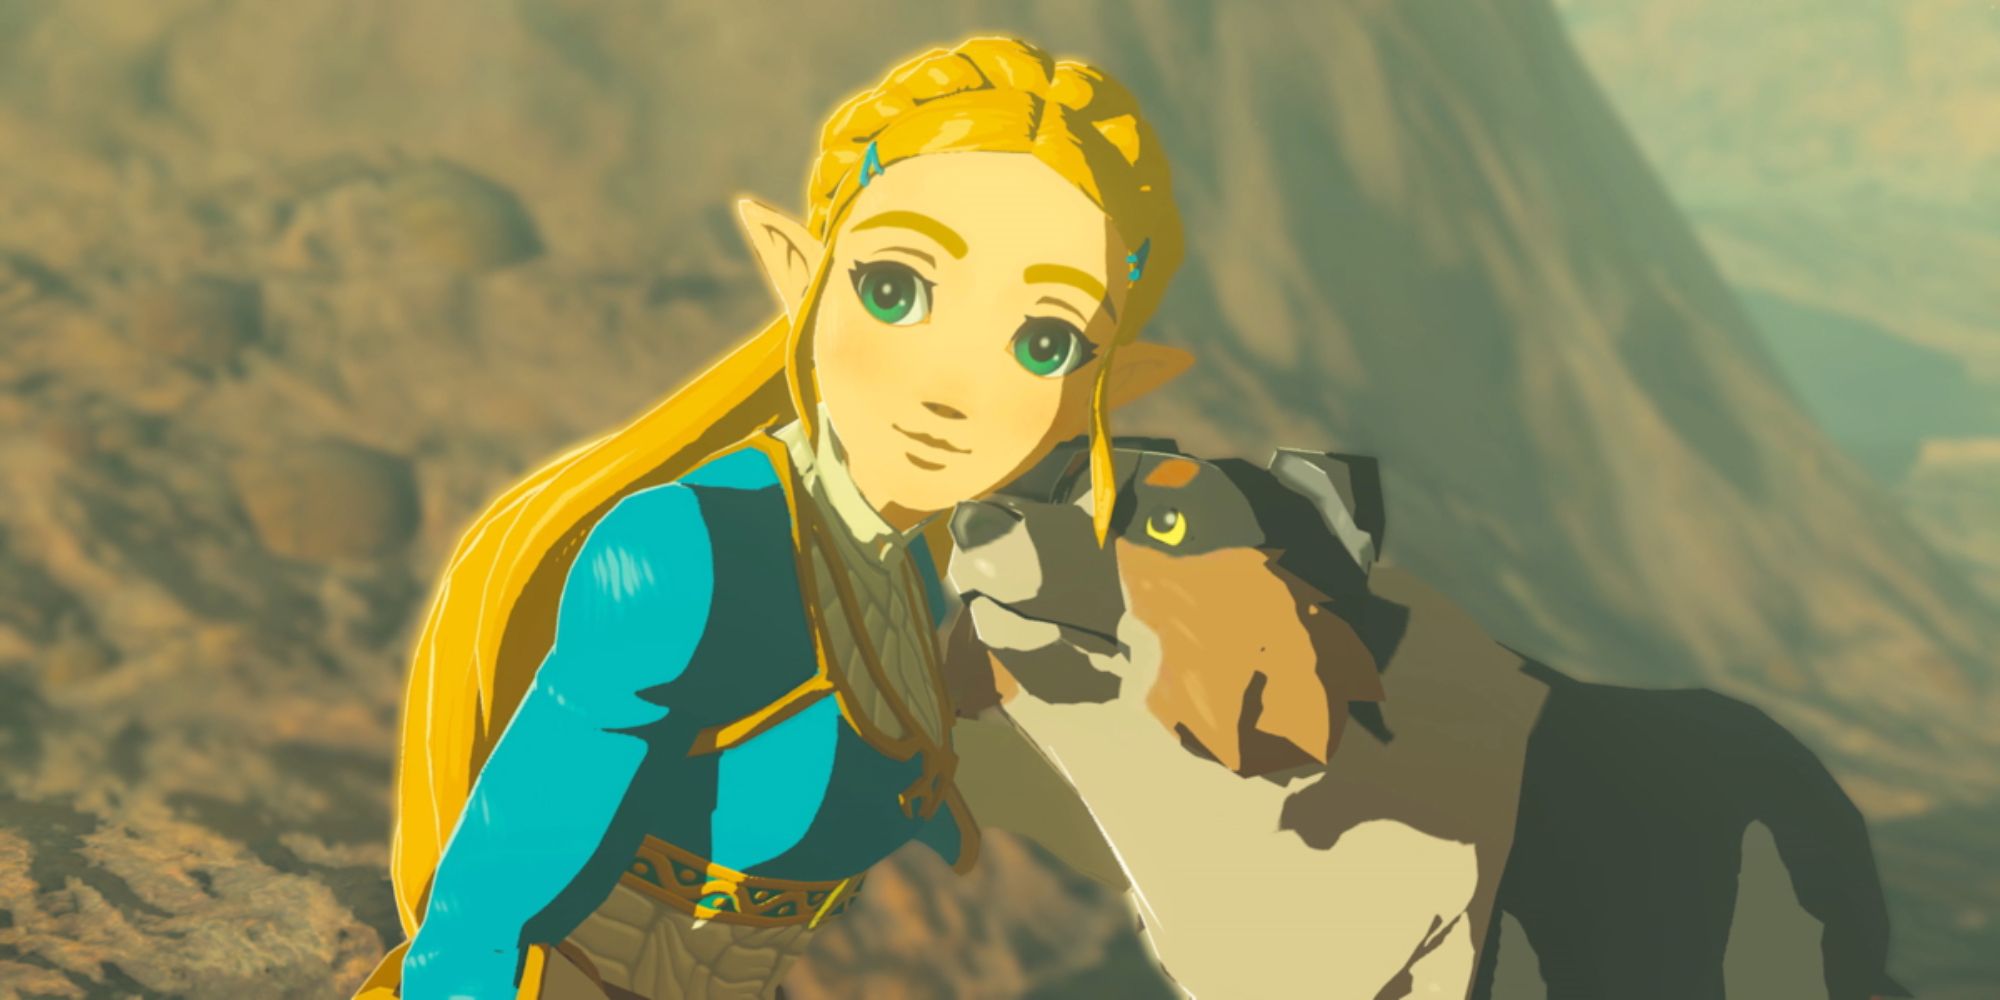 Zelda petting a dog in Breath of the Wild